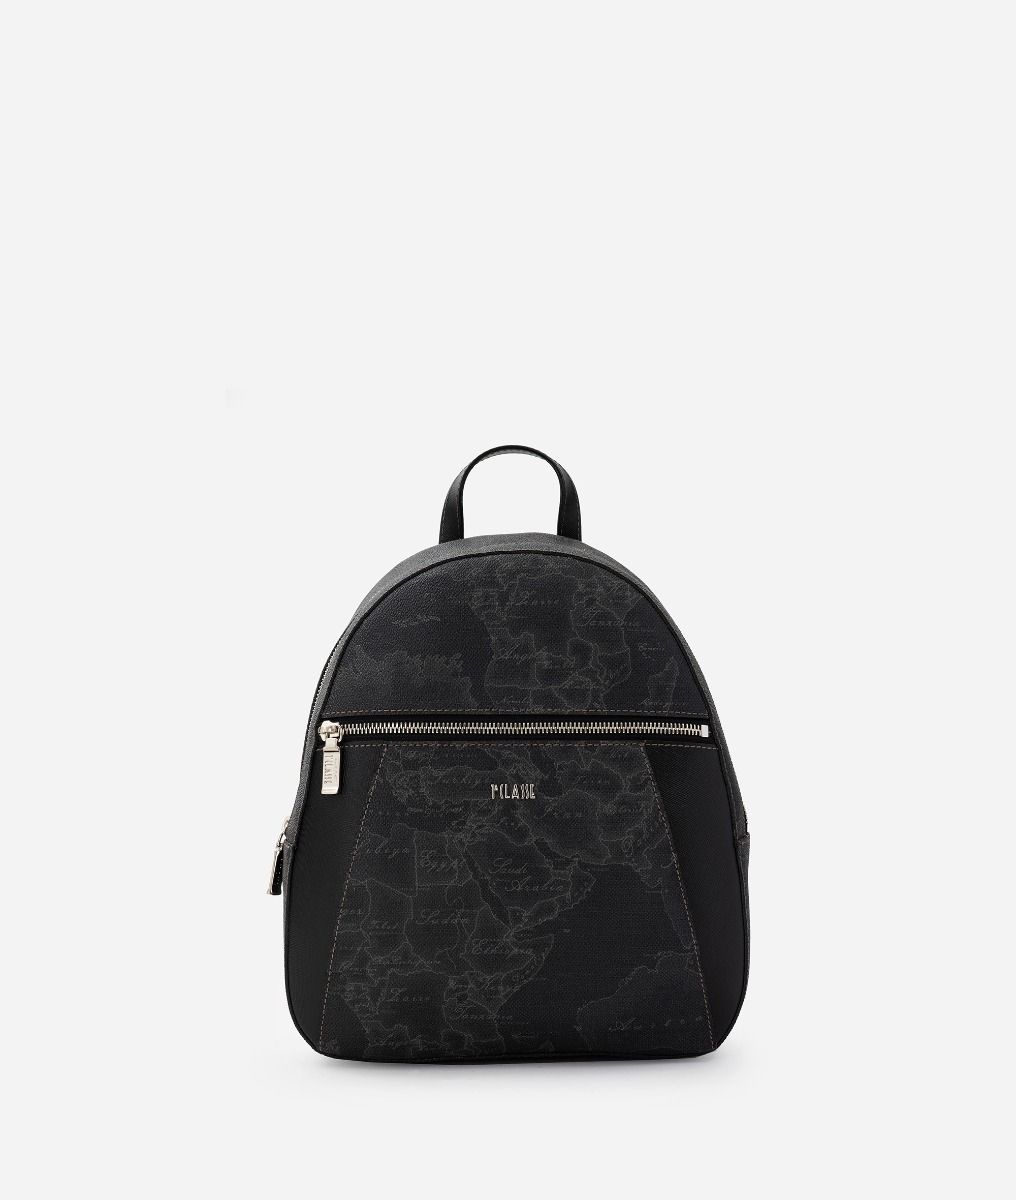 Geo Black backpack with leather inserts,front